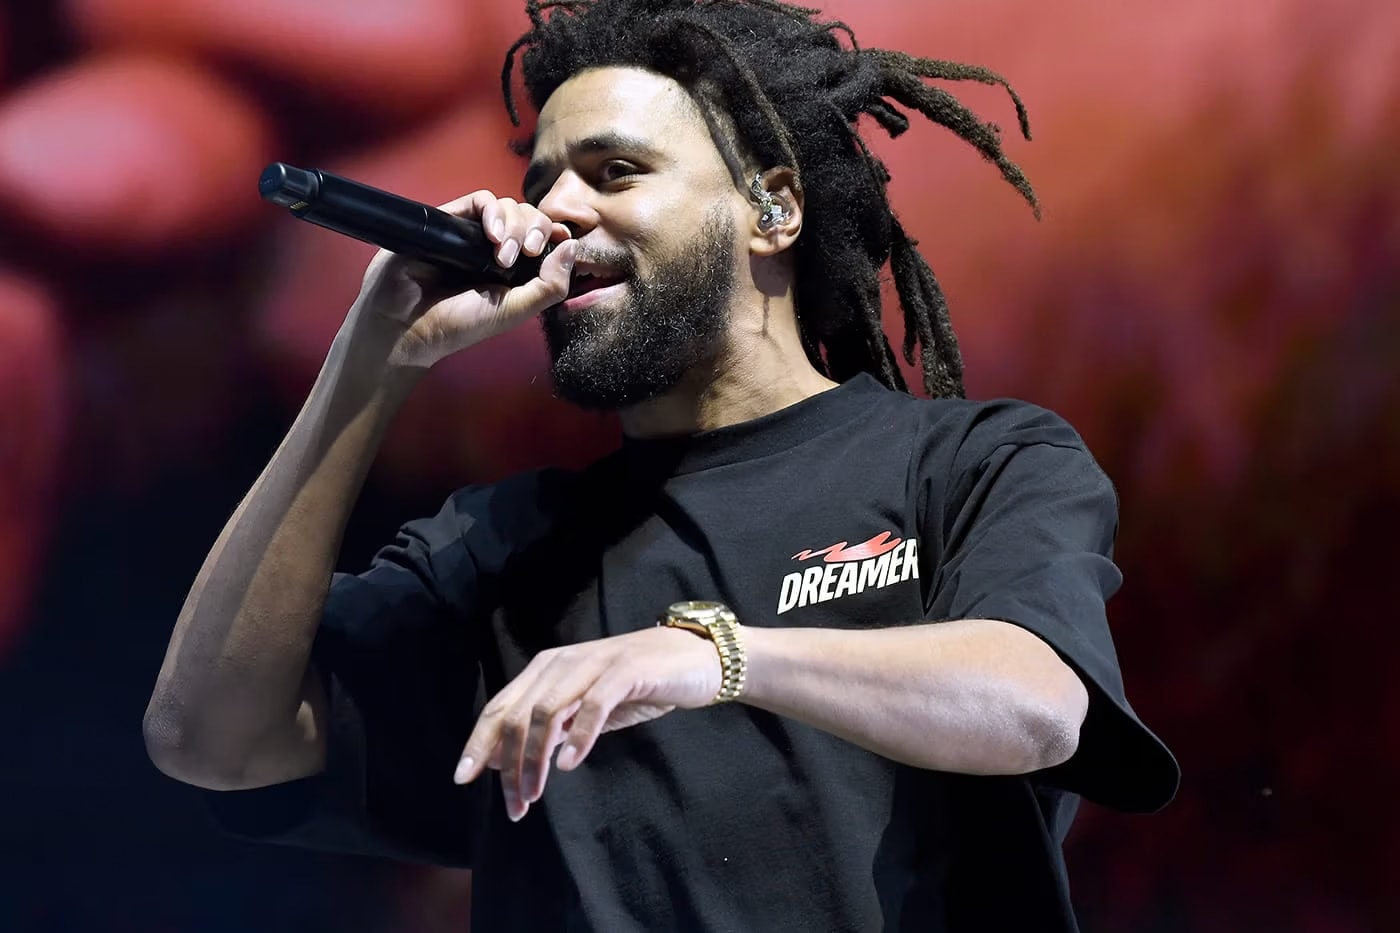 J・コールがケンドリック・ラマーへのディス曲をついにストリーミングから削除 J. Cole Has Officially Removed Kendrick Lamar Diss Track "7 Minute Drill" on All Streaming Platforms services rapper drake hip hop metro boomin future might delete later spotify apple music